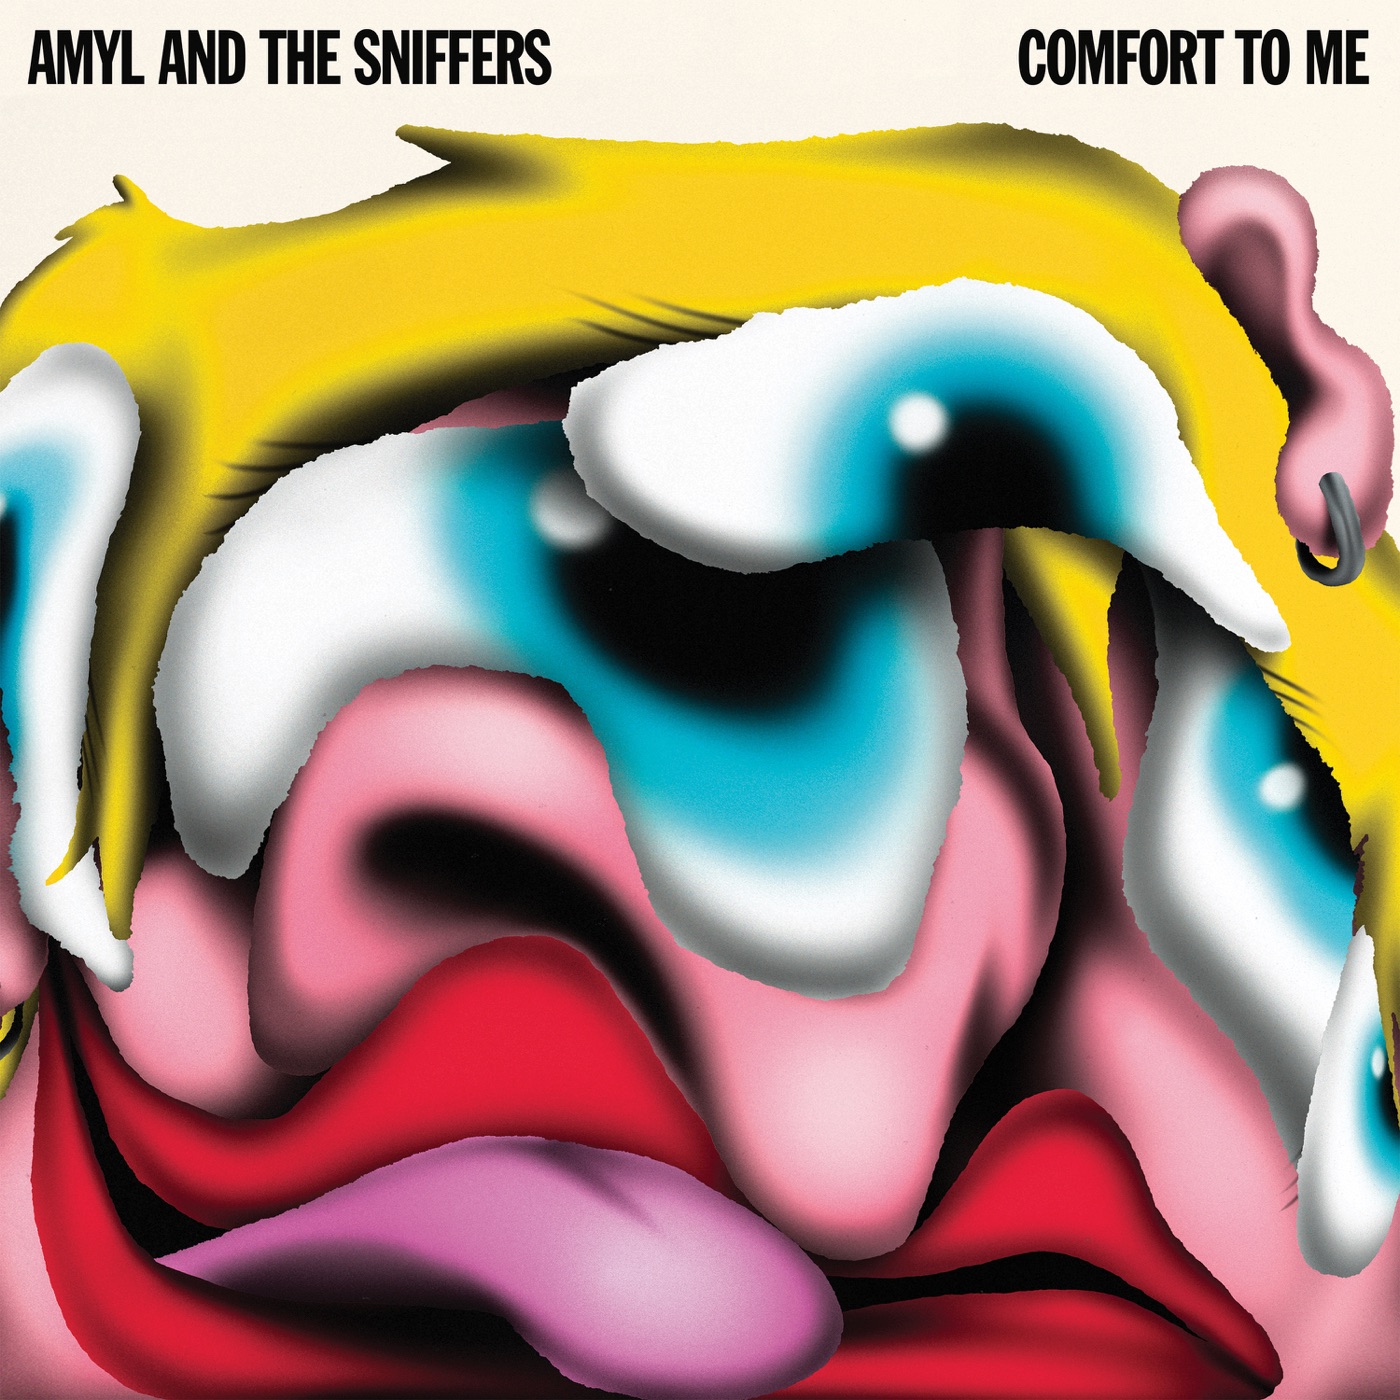 Comfort To Me by Amyl and The Sniffers